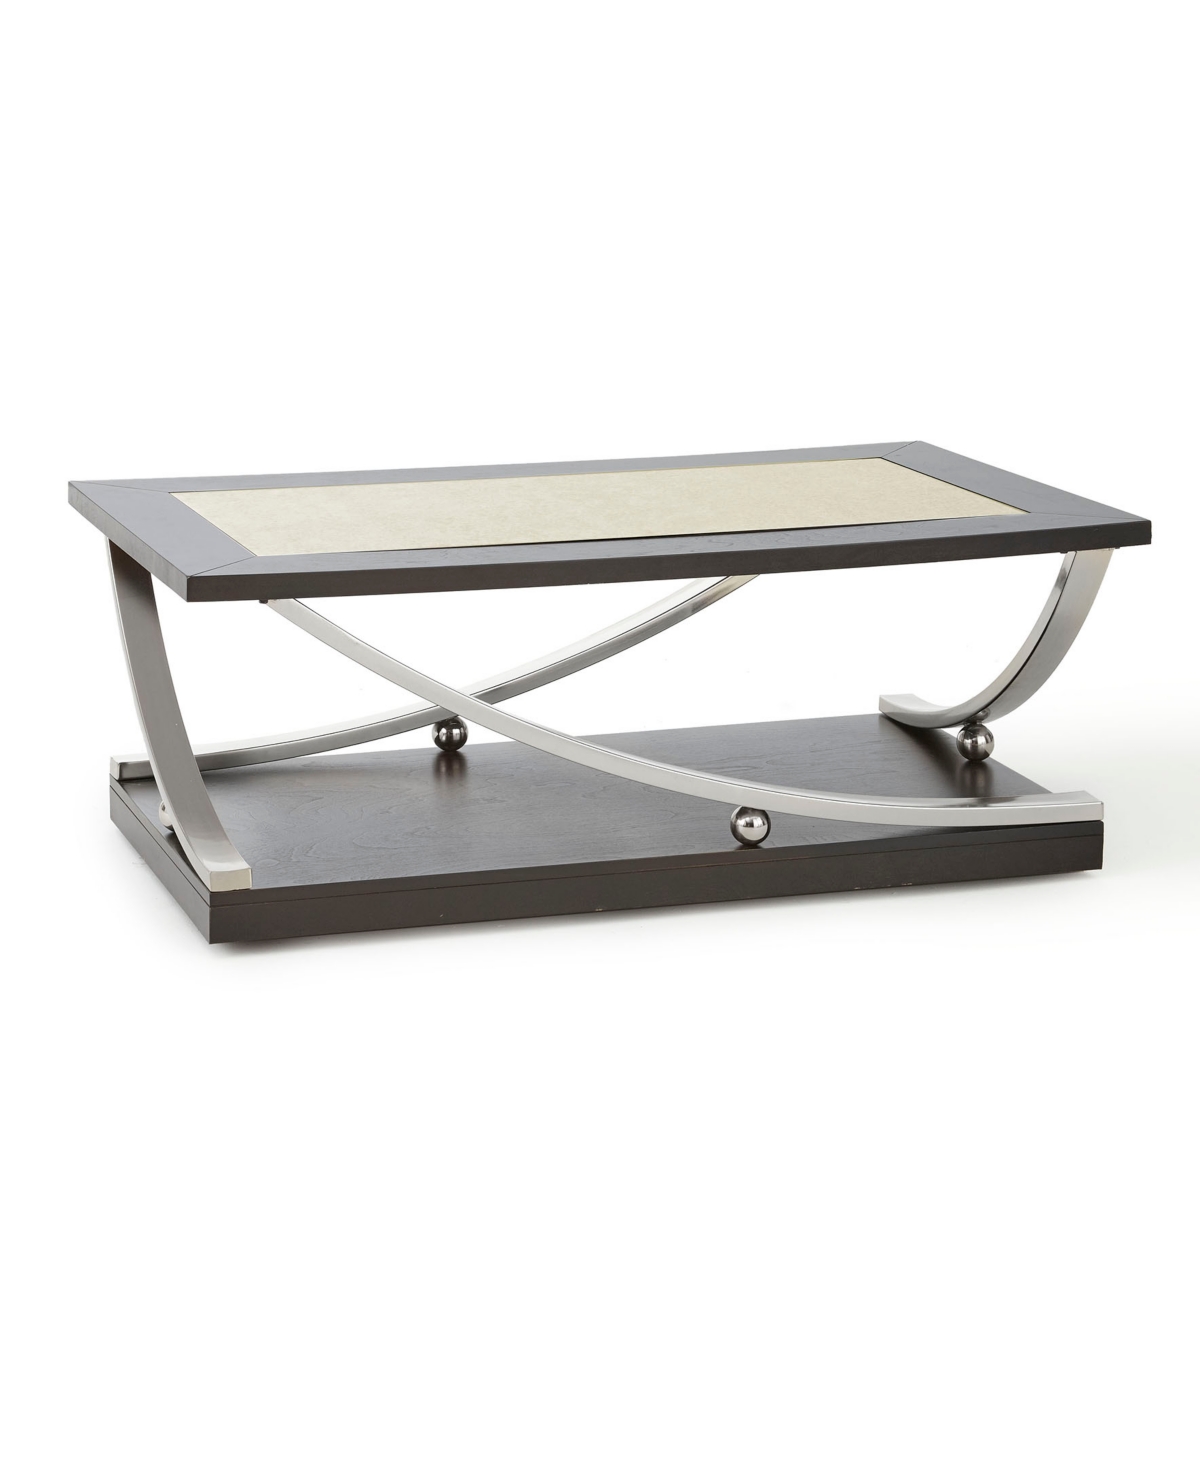 Steve Silver Ramsey 48" Wood And Metal Cocktail Table With Casters In Ebony